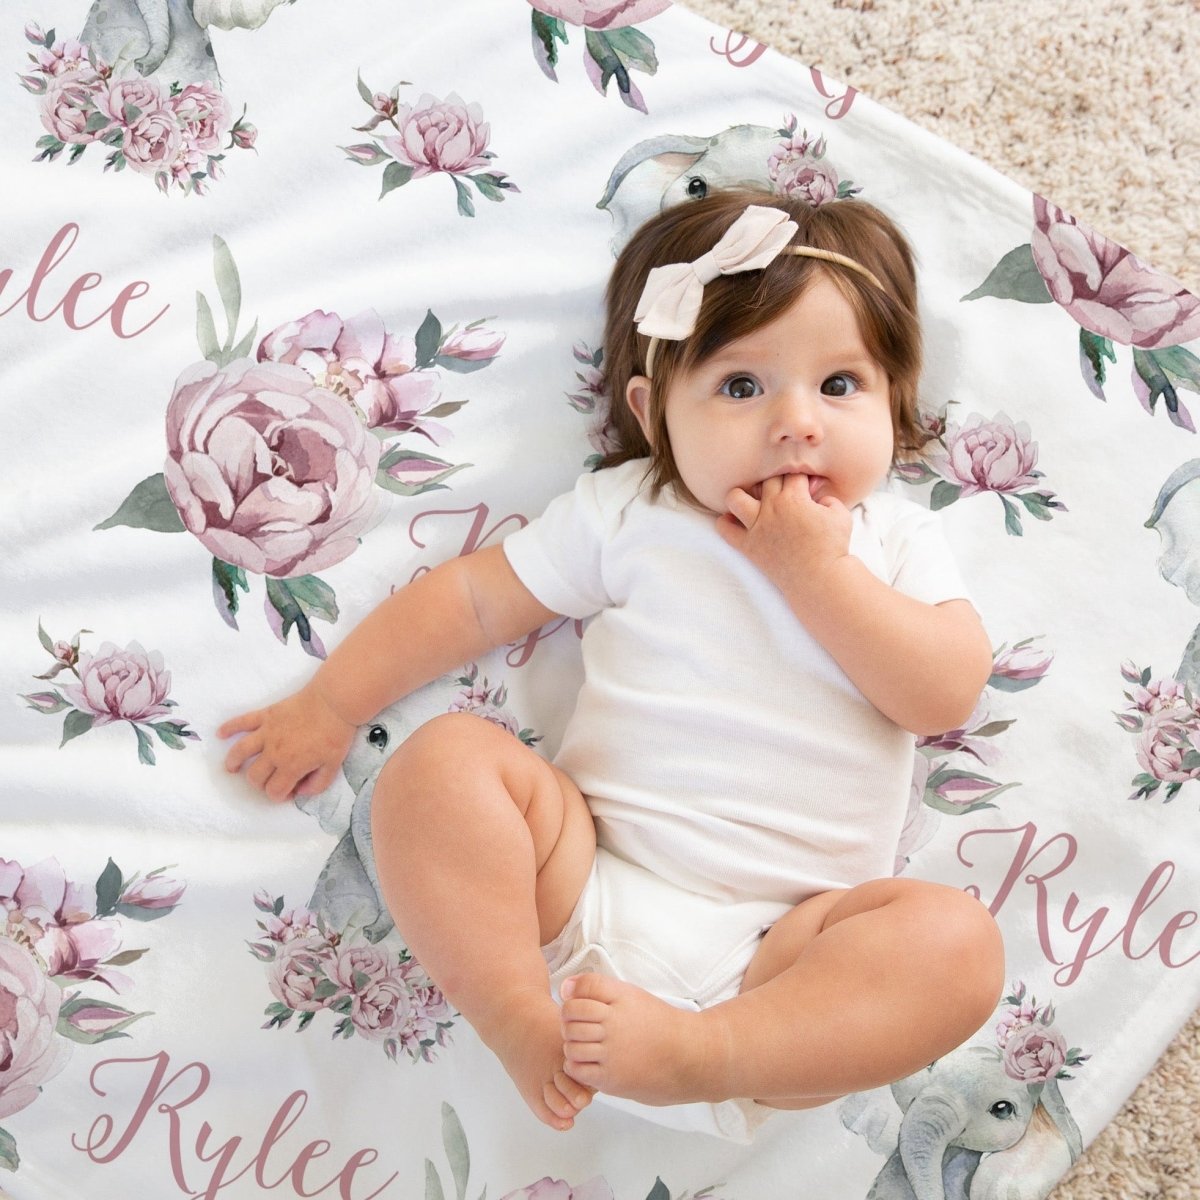 Floral Elephant Personalized Baby Blanket - Minky Blanket